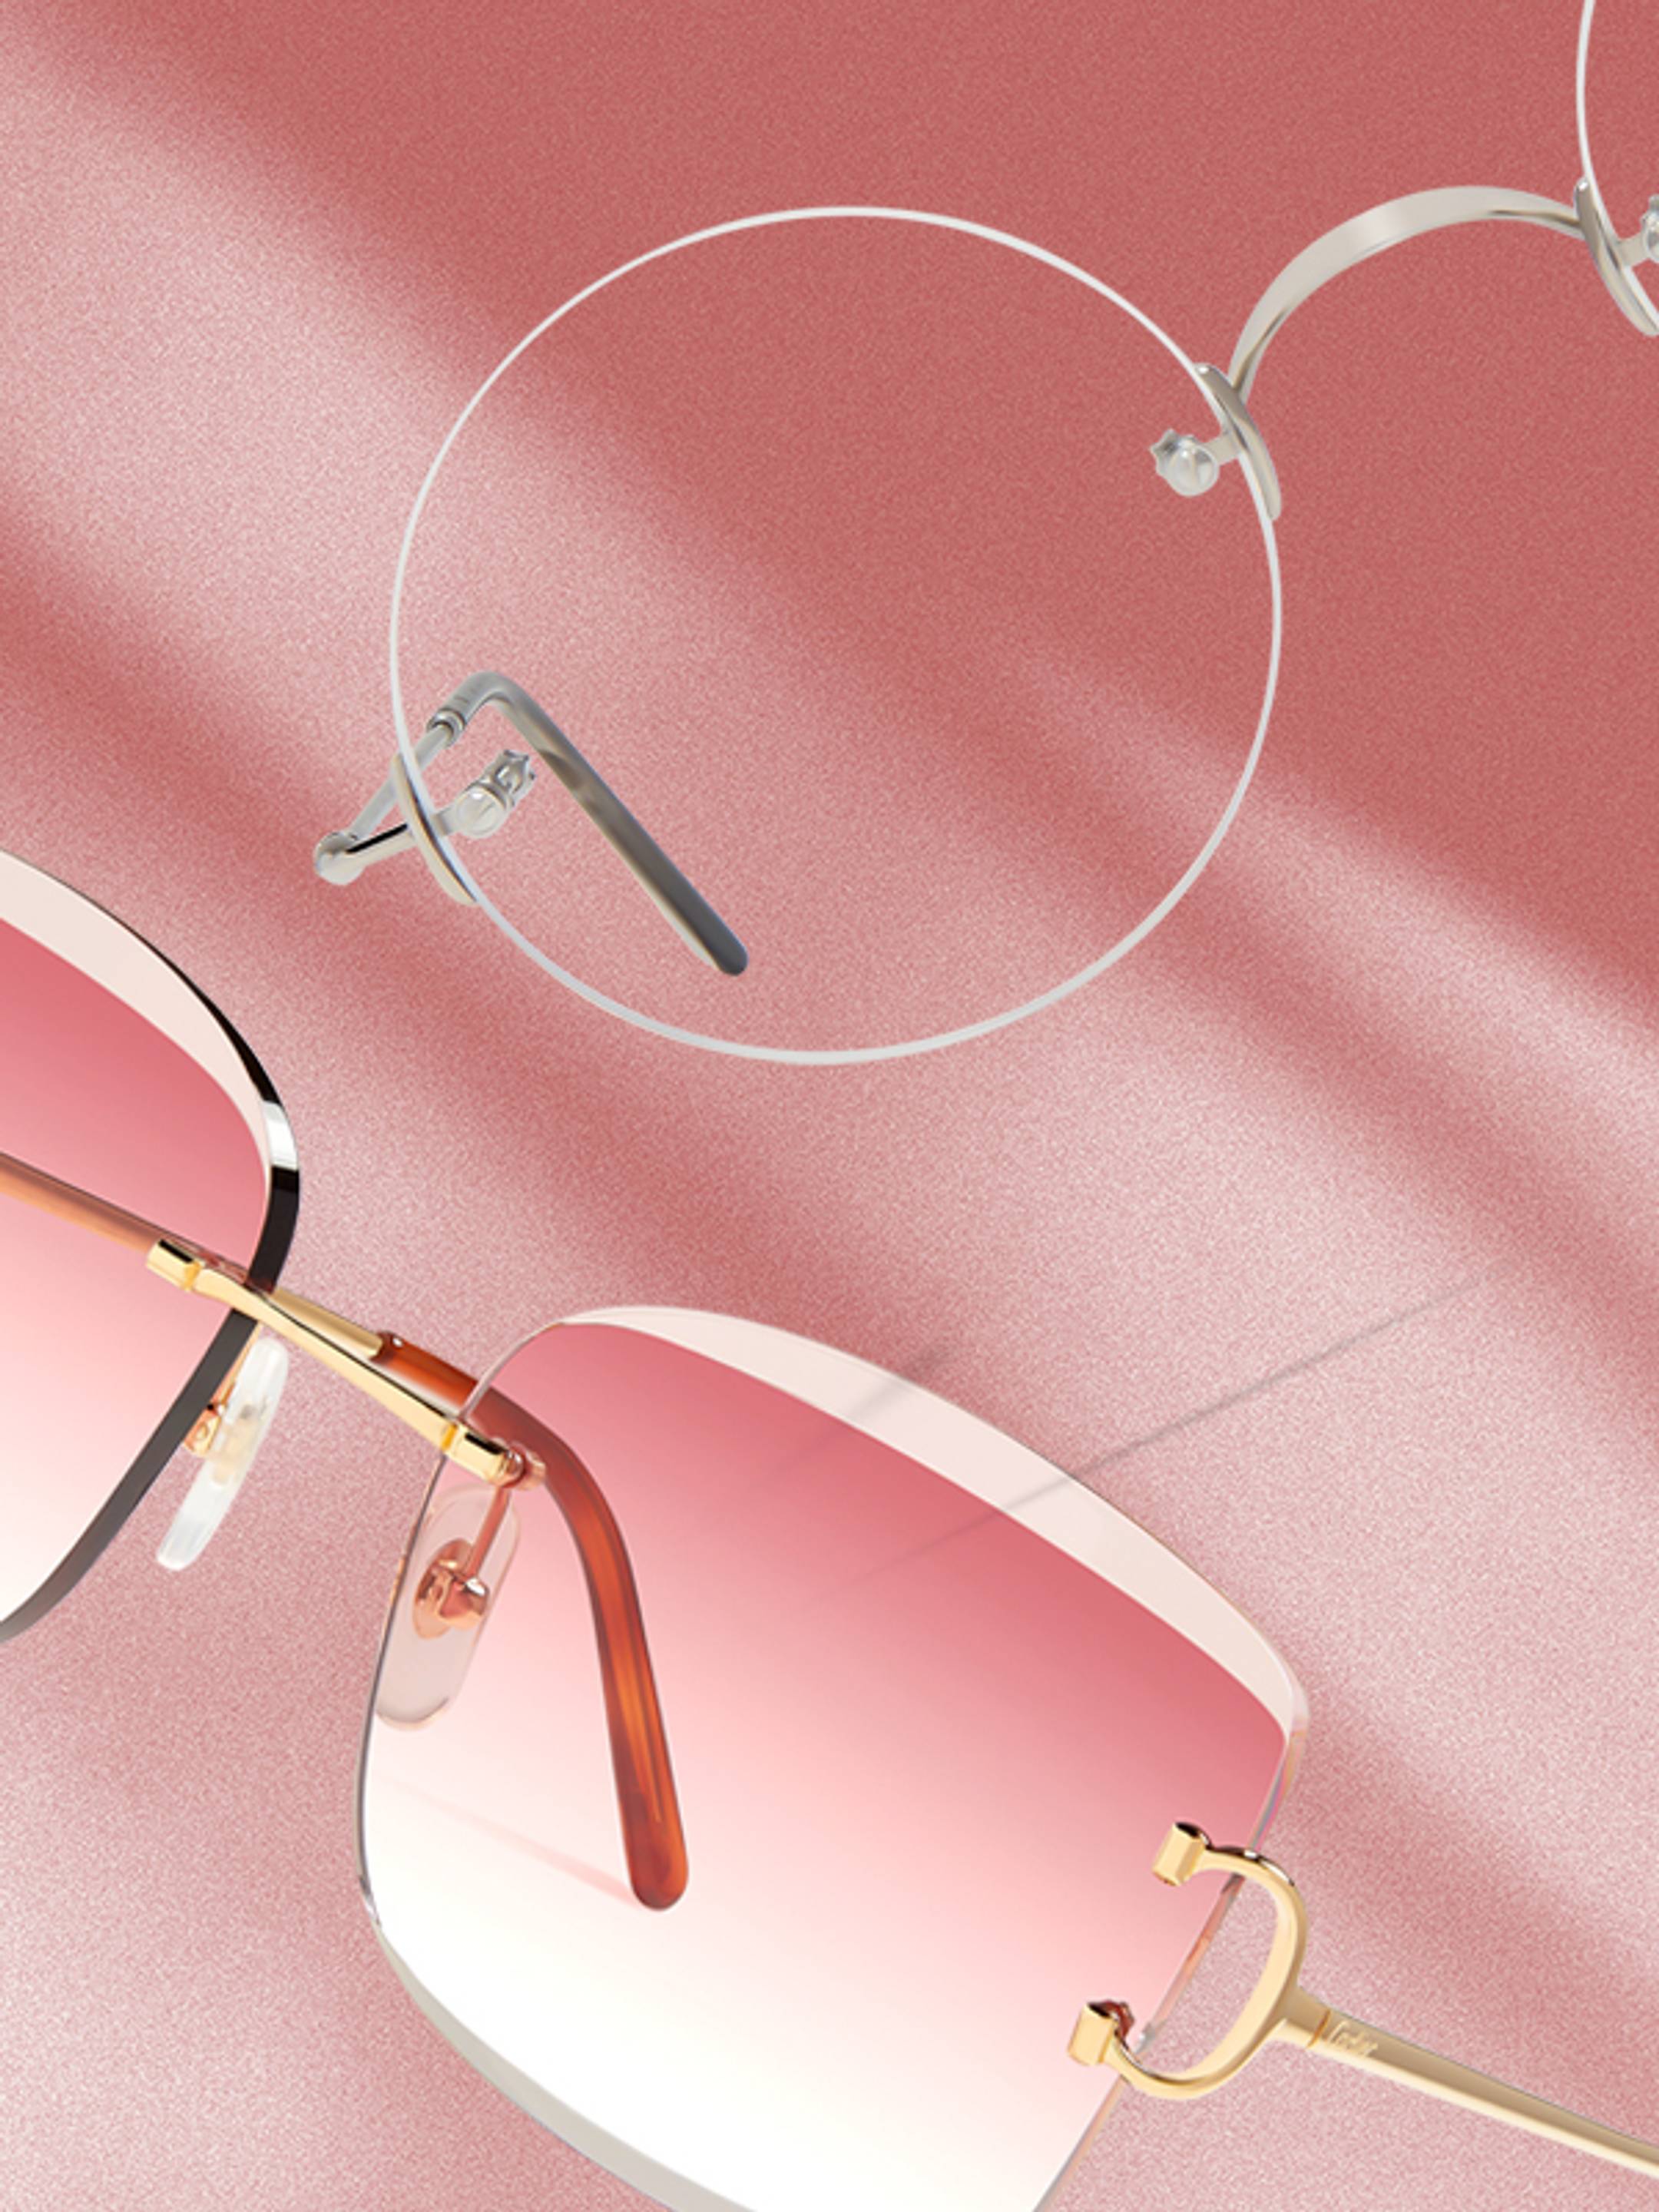 Close up of sunglasses and eyeglasses on a textured pink background